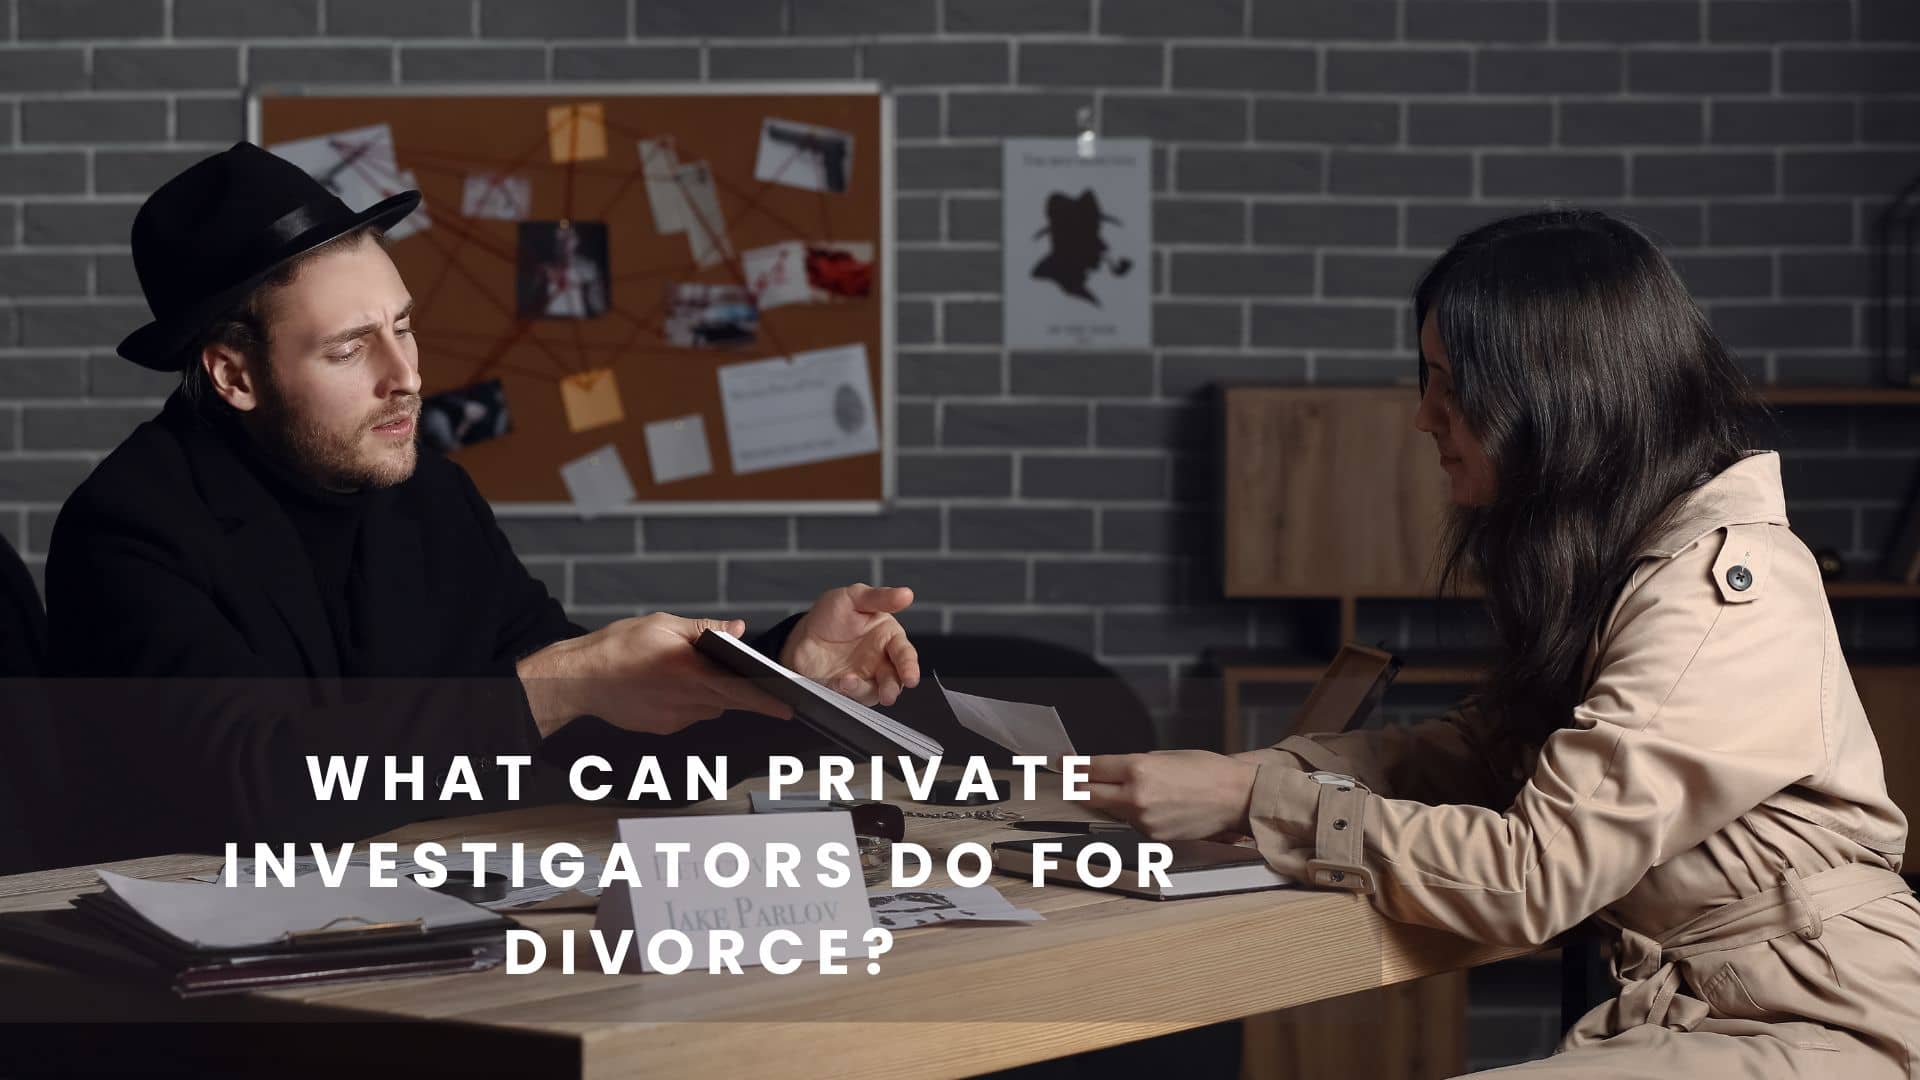 What Can Private Investigators Do for Divorce?